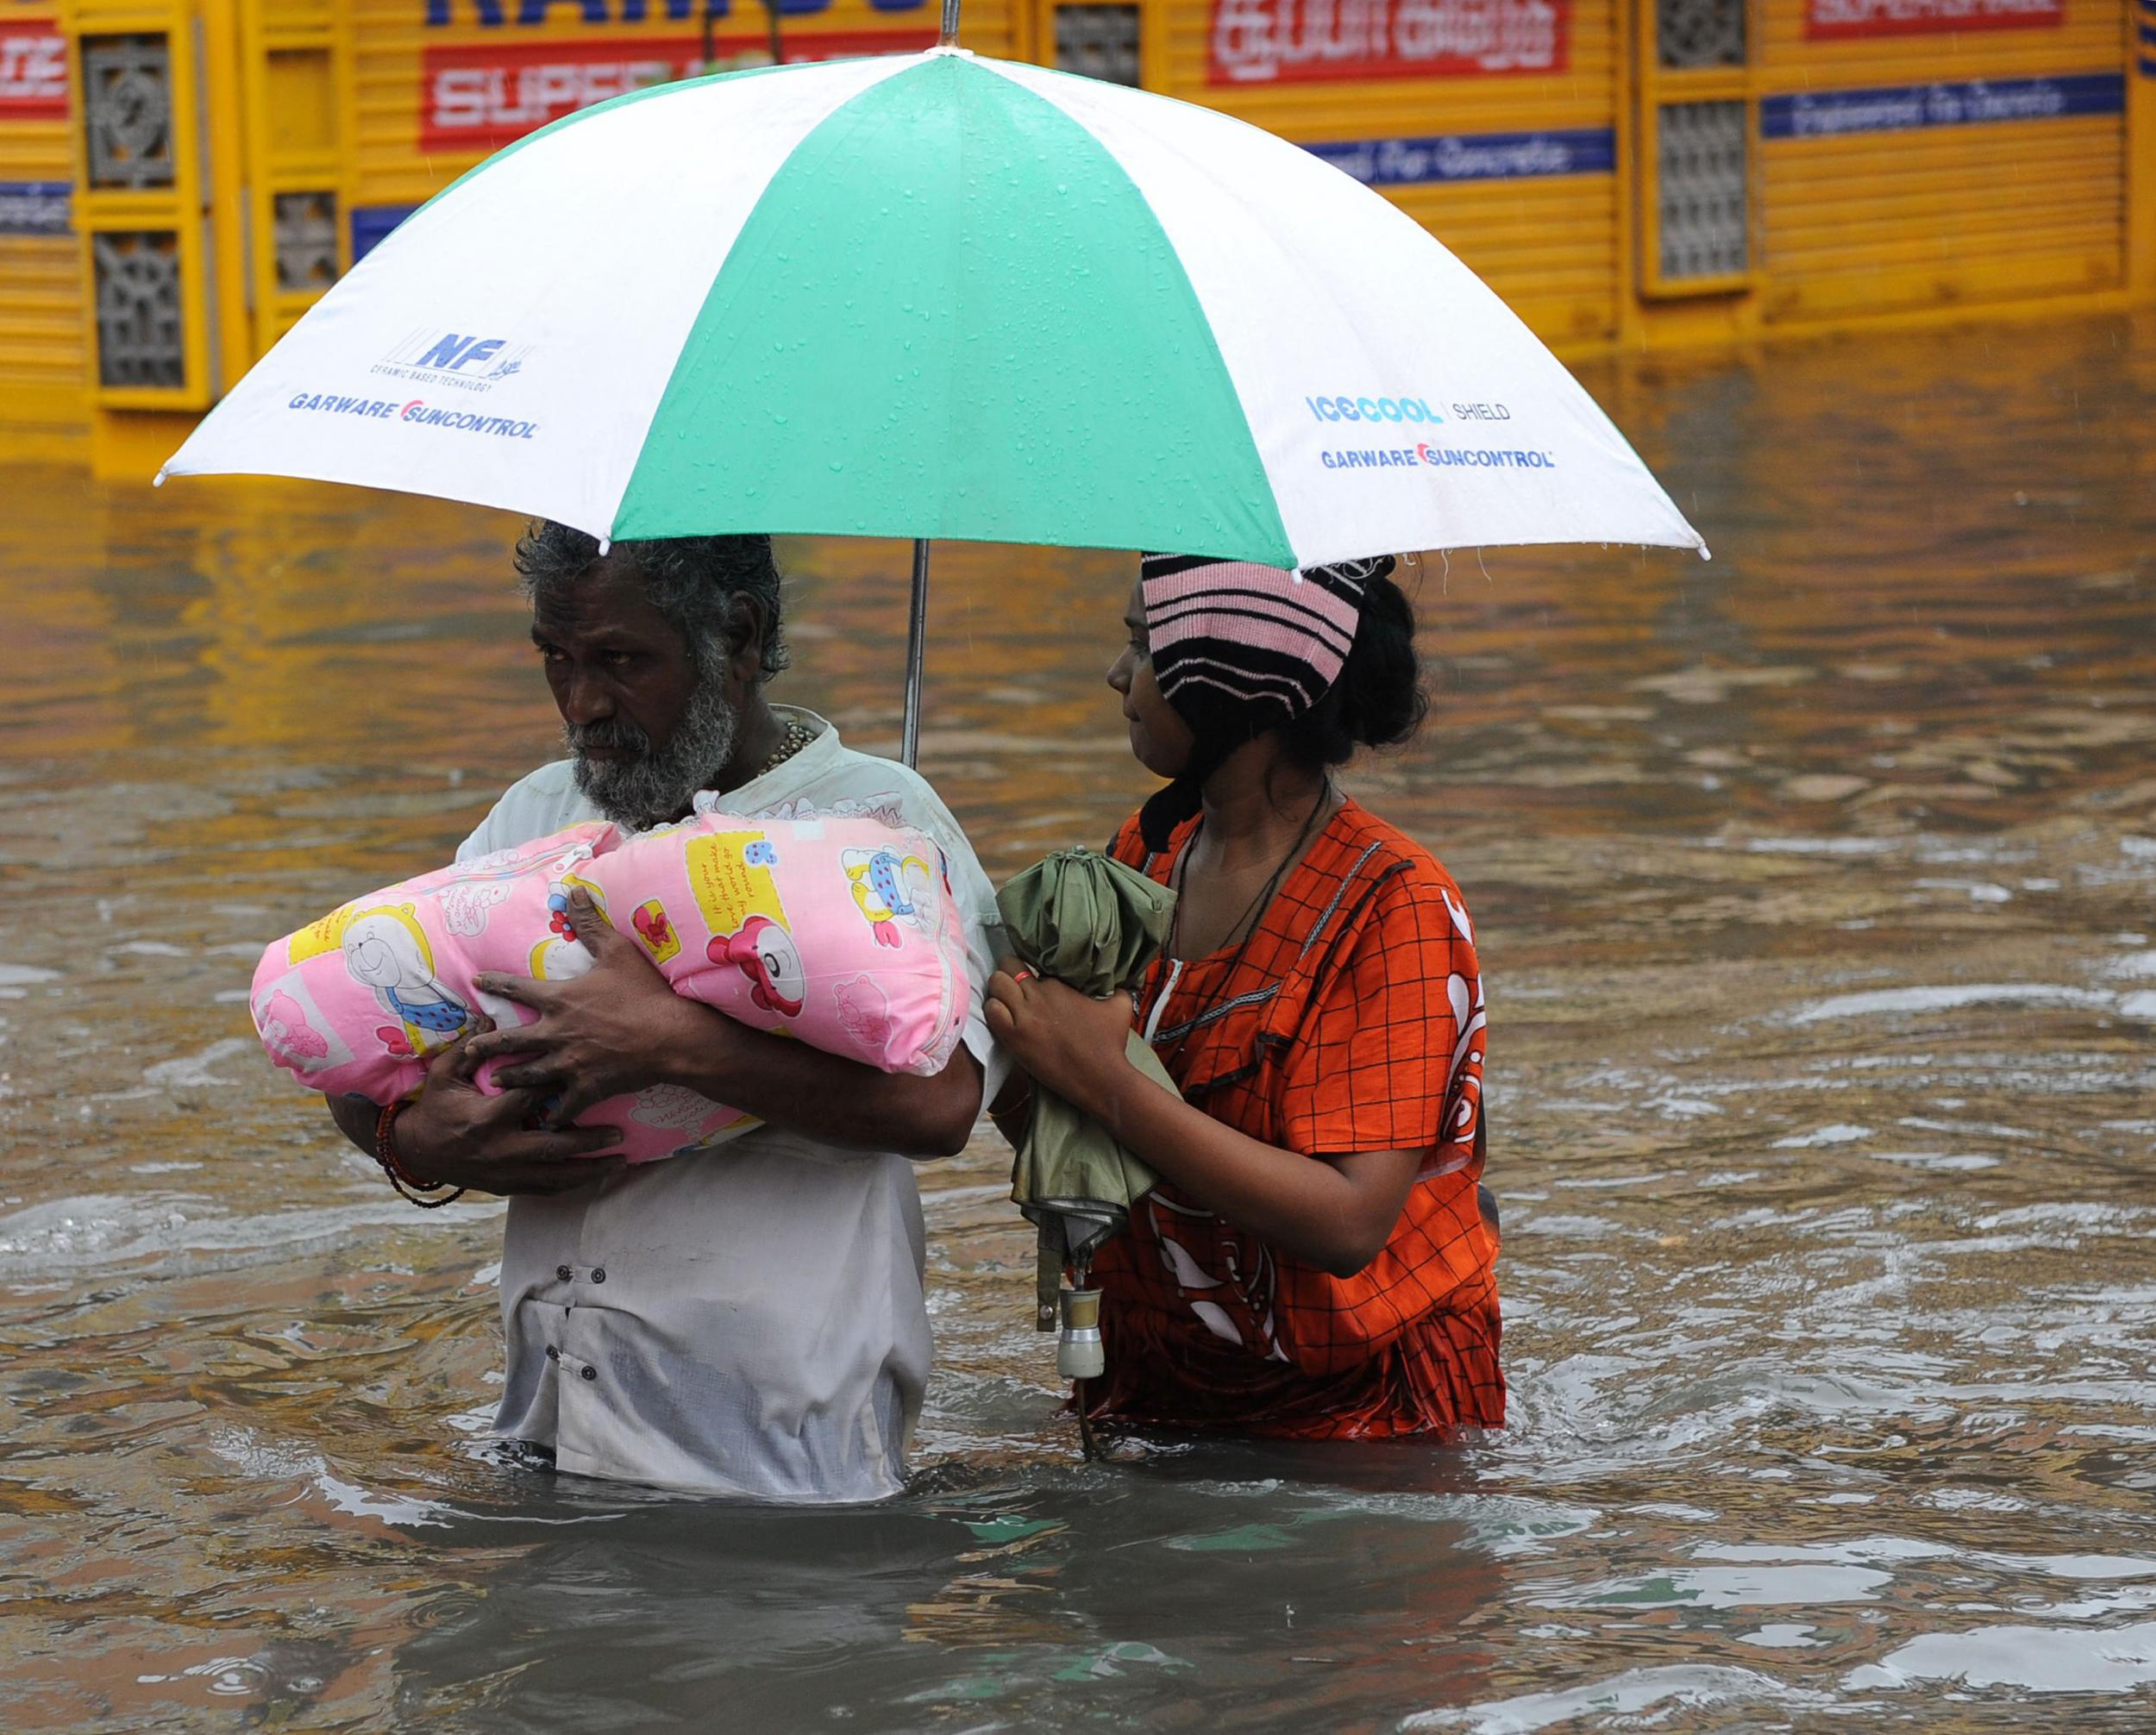 An Indian family wade through the flood waters in Chennai